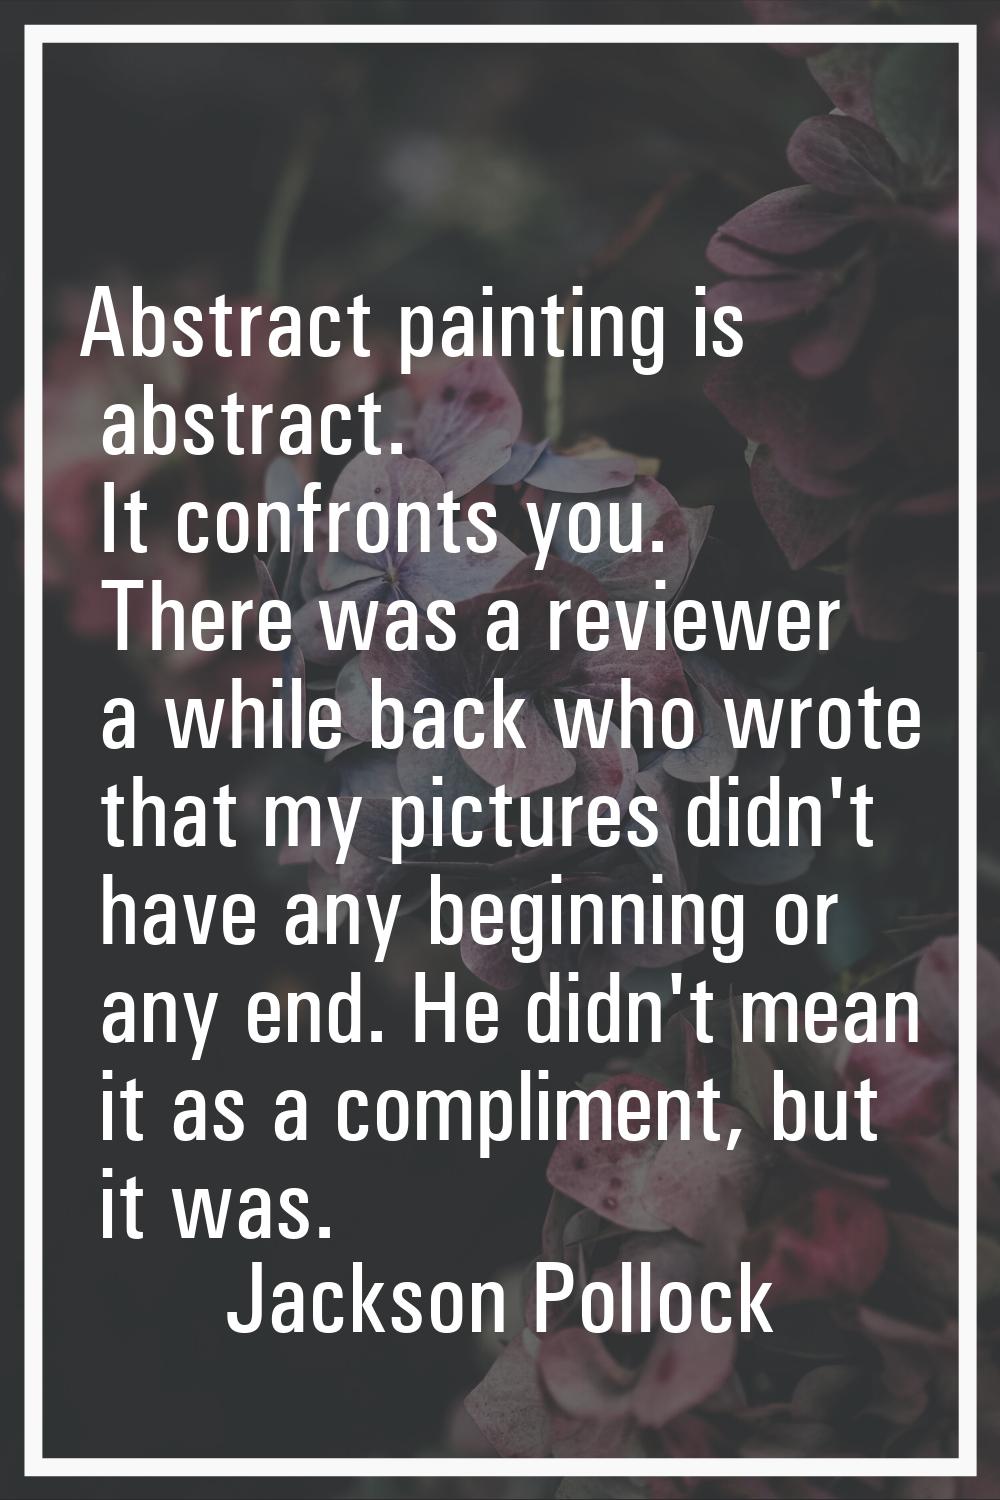 Abstract painting is abstract. It confronts you. There was a reviewer a while back who wrote that m